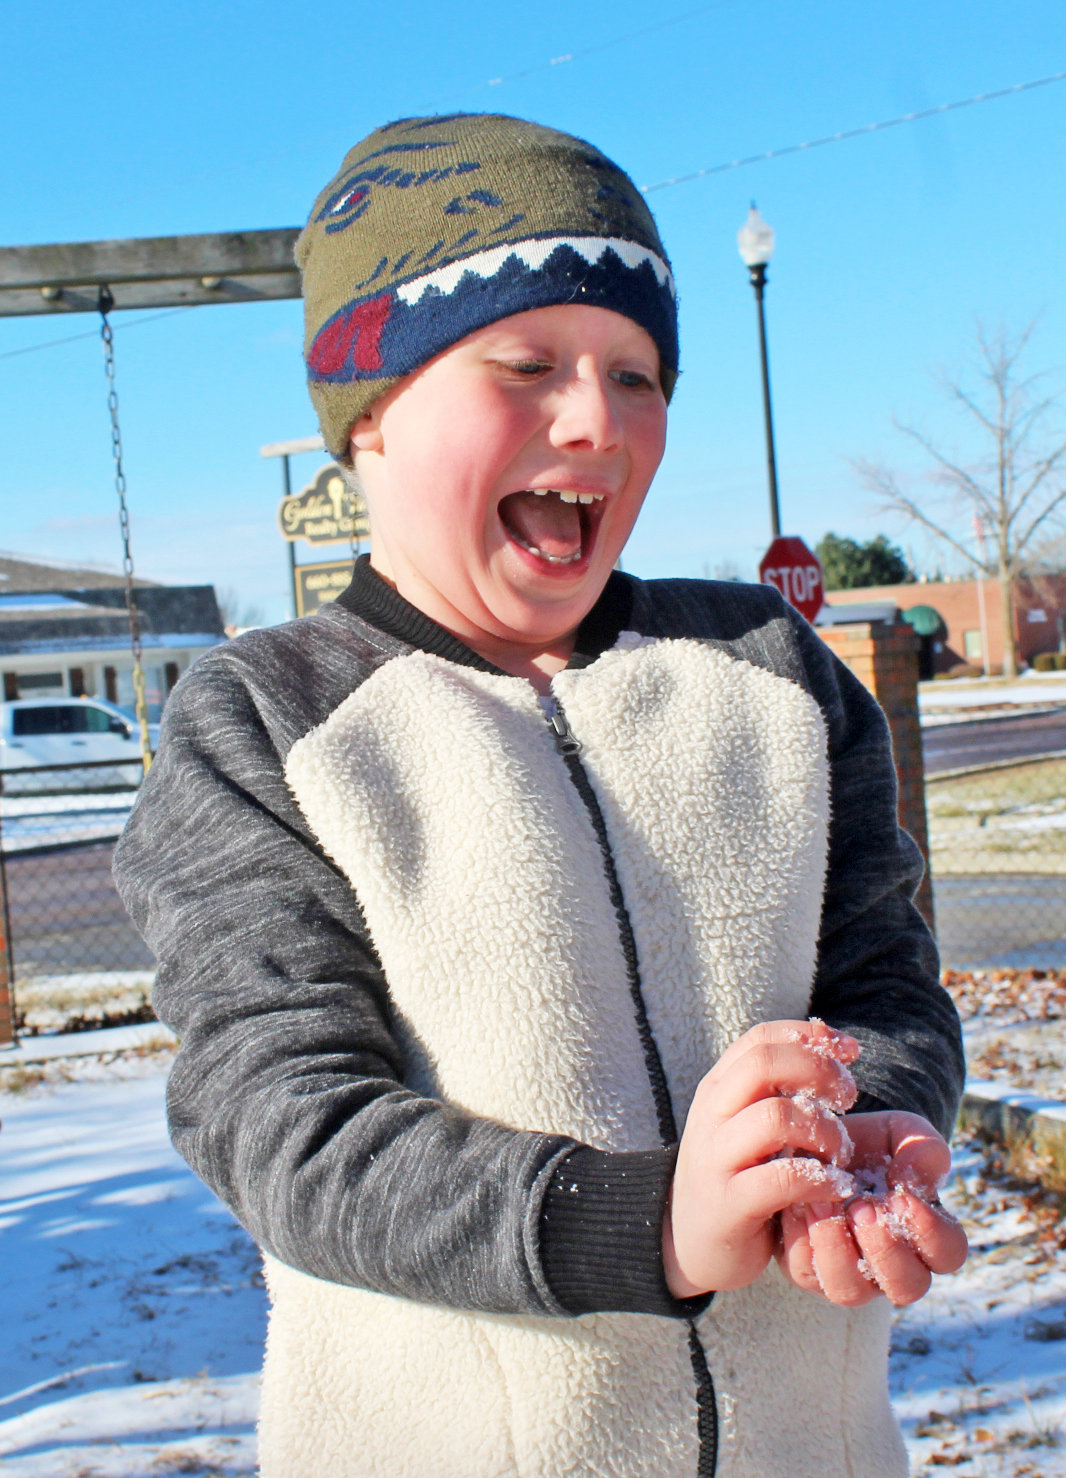 “This is cold,” said Noah Aldridge as he held handfuls of
snow in the air on January 6 at the old playground by the
former Holy Rosary Catholic Church on 2nd Street in
Clinton.